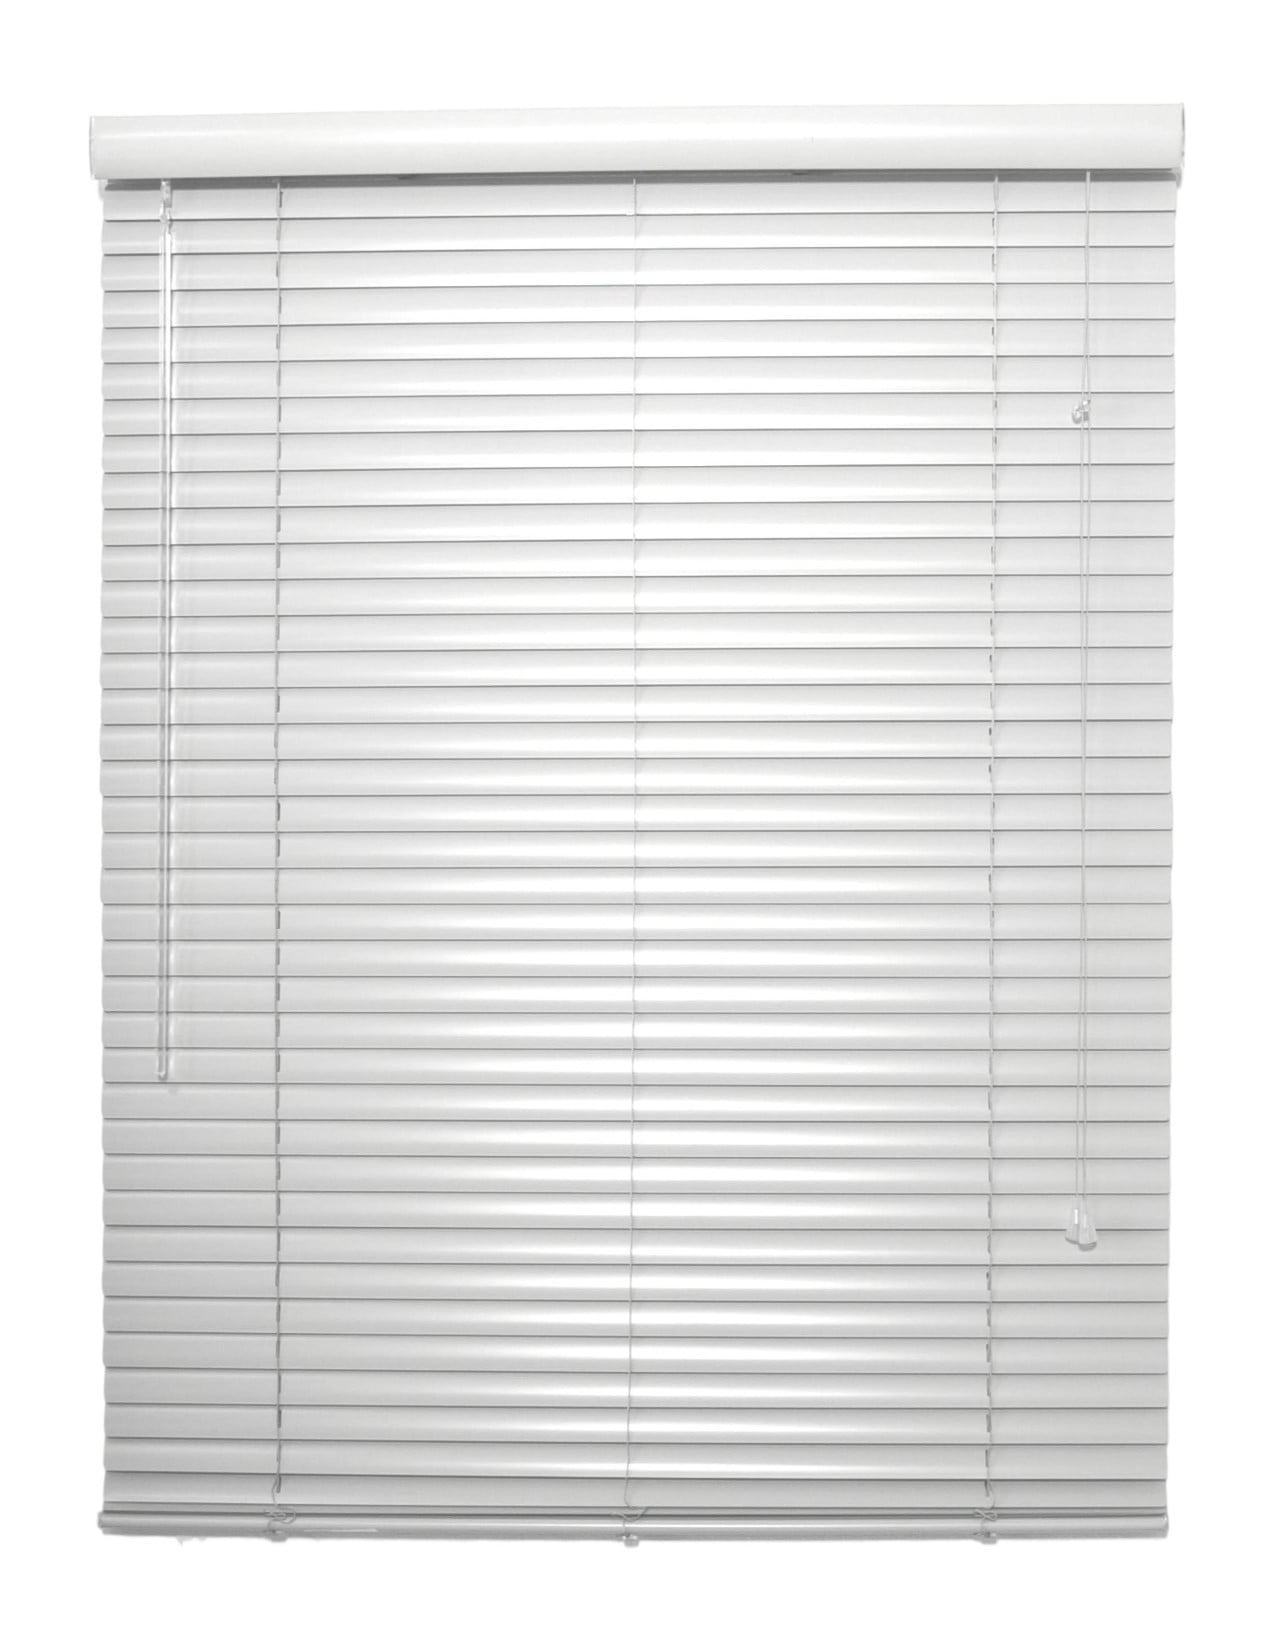 GMA Group 1 Inch Corded Aluminum Mini Blinds Shades for Window ...